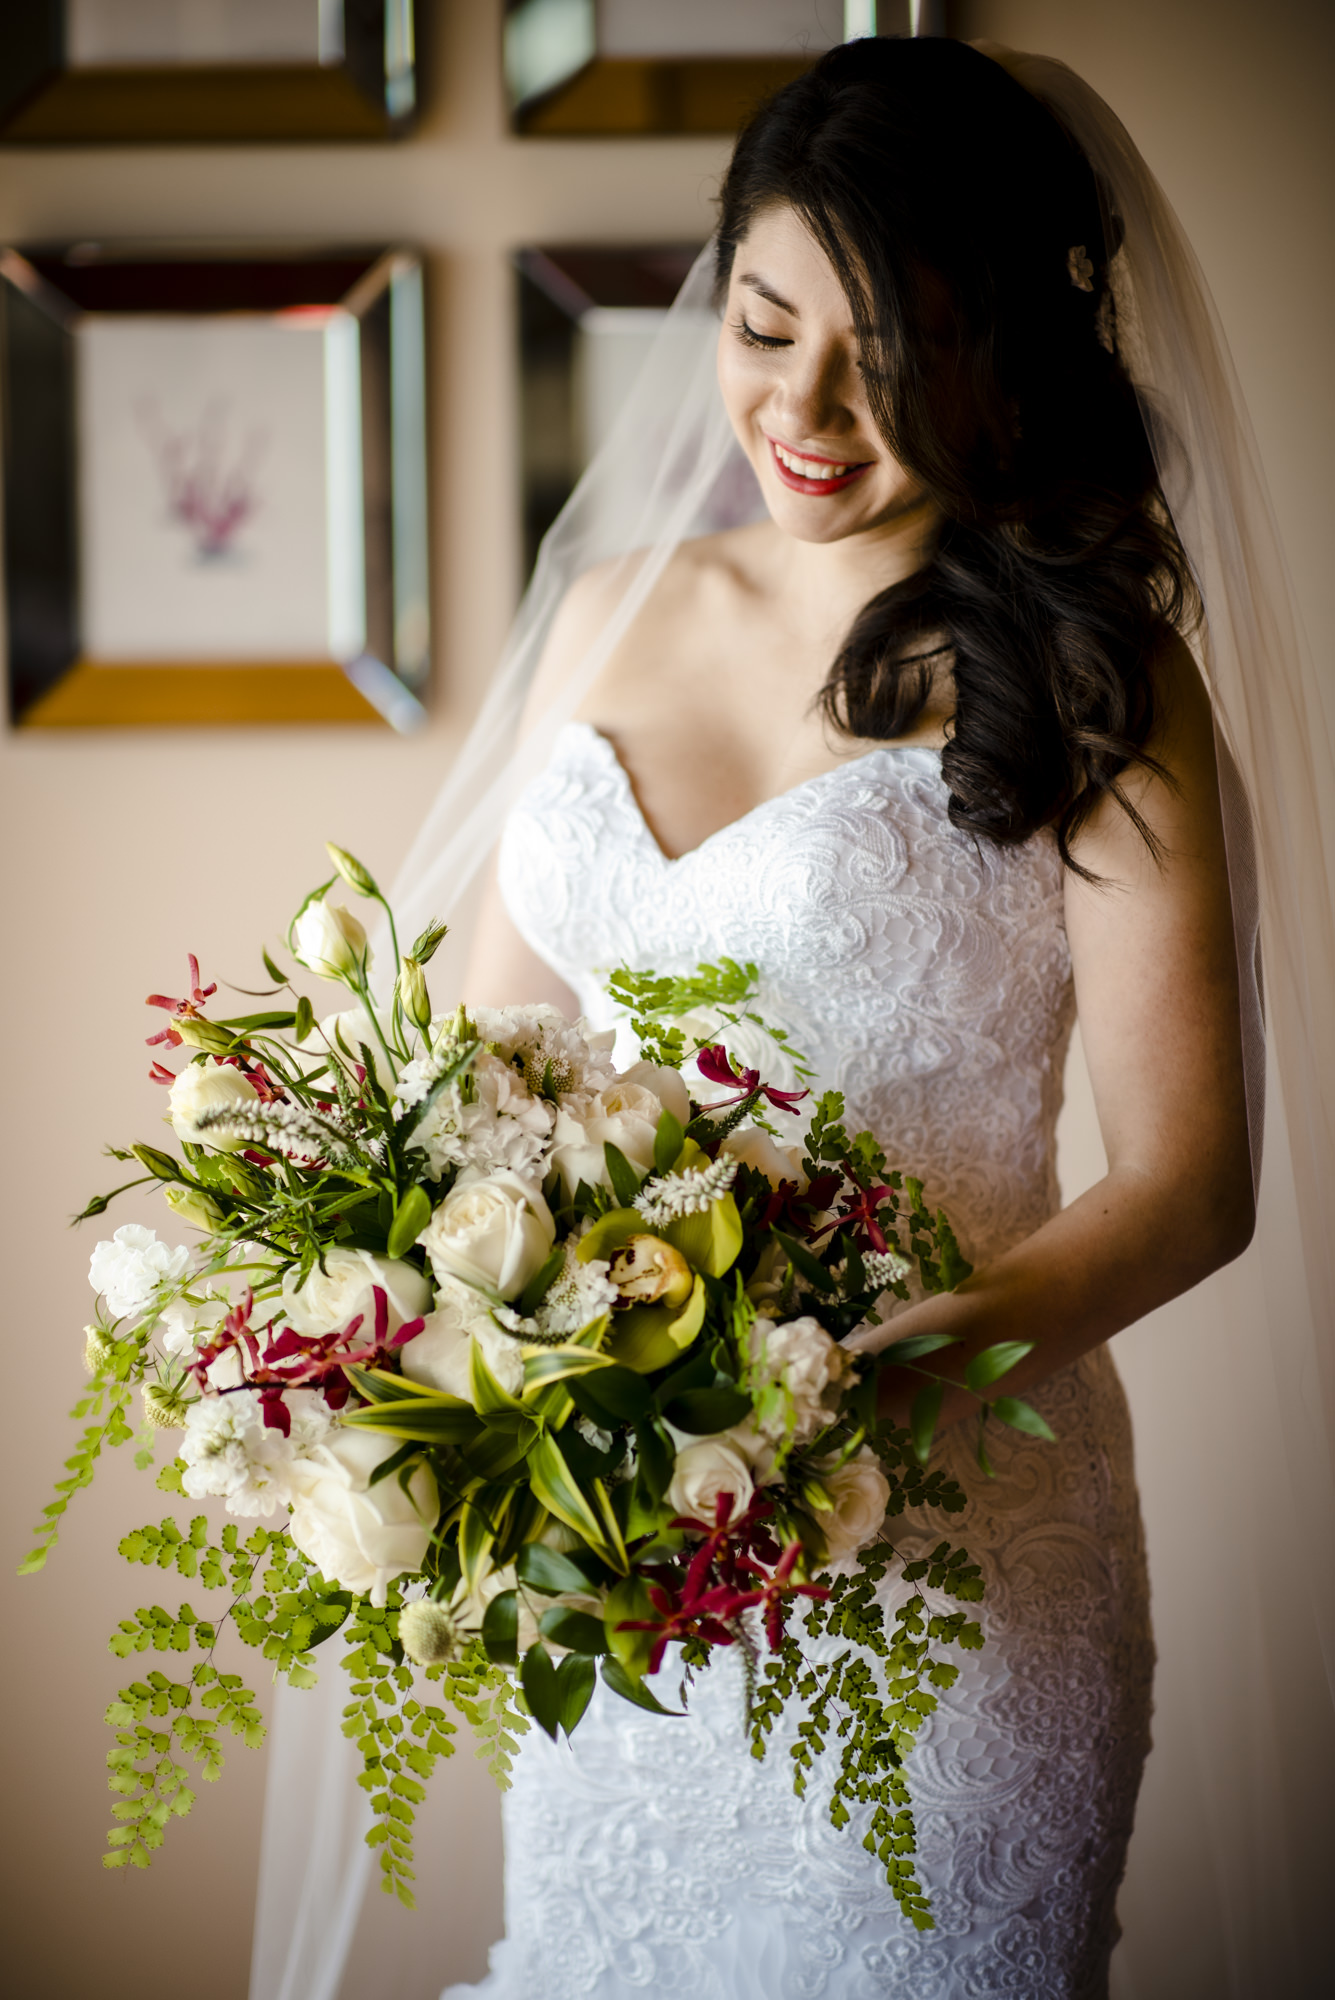 Beautiful bride Kelly and her bridal bouquet in white green and red. Photo by Jenn Tai, Seattle Wedding photographer